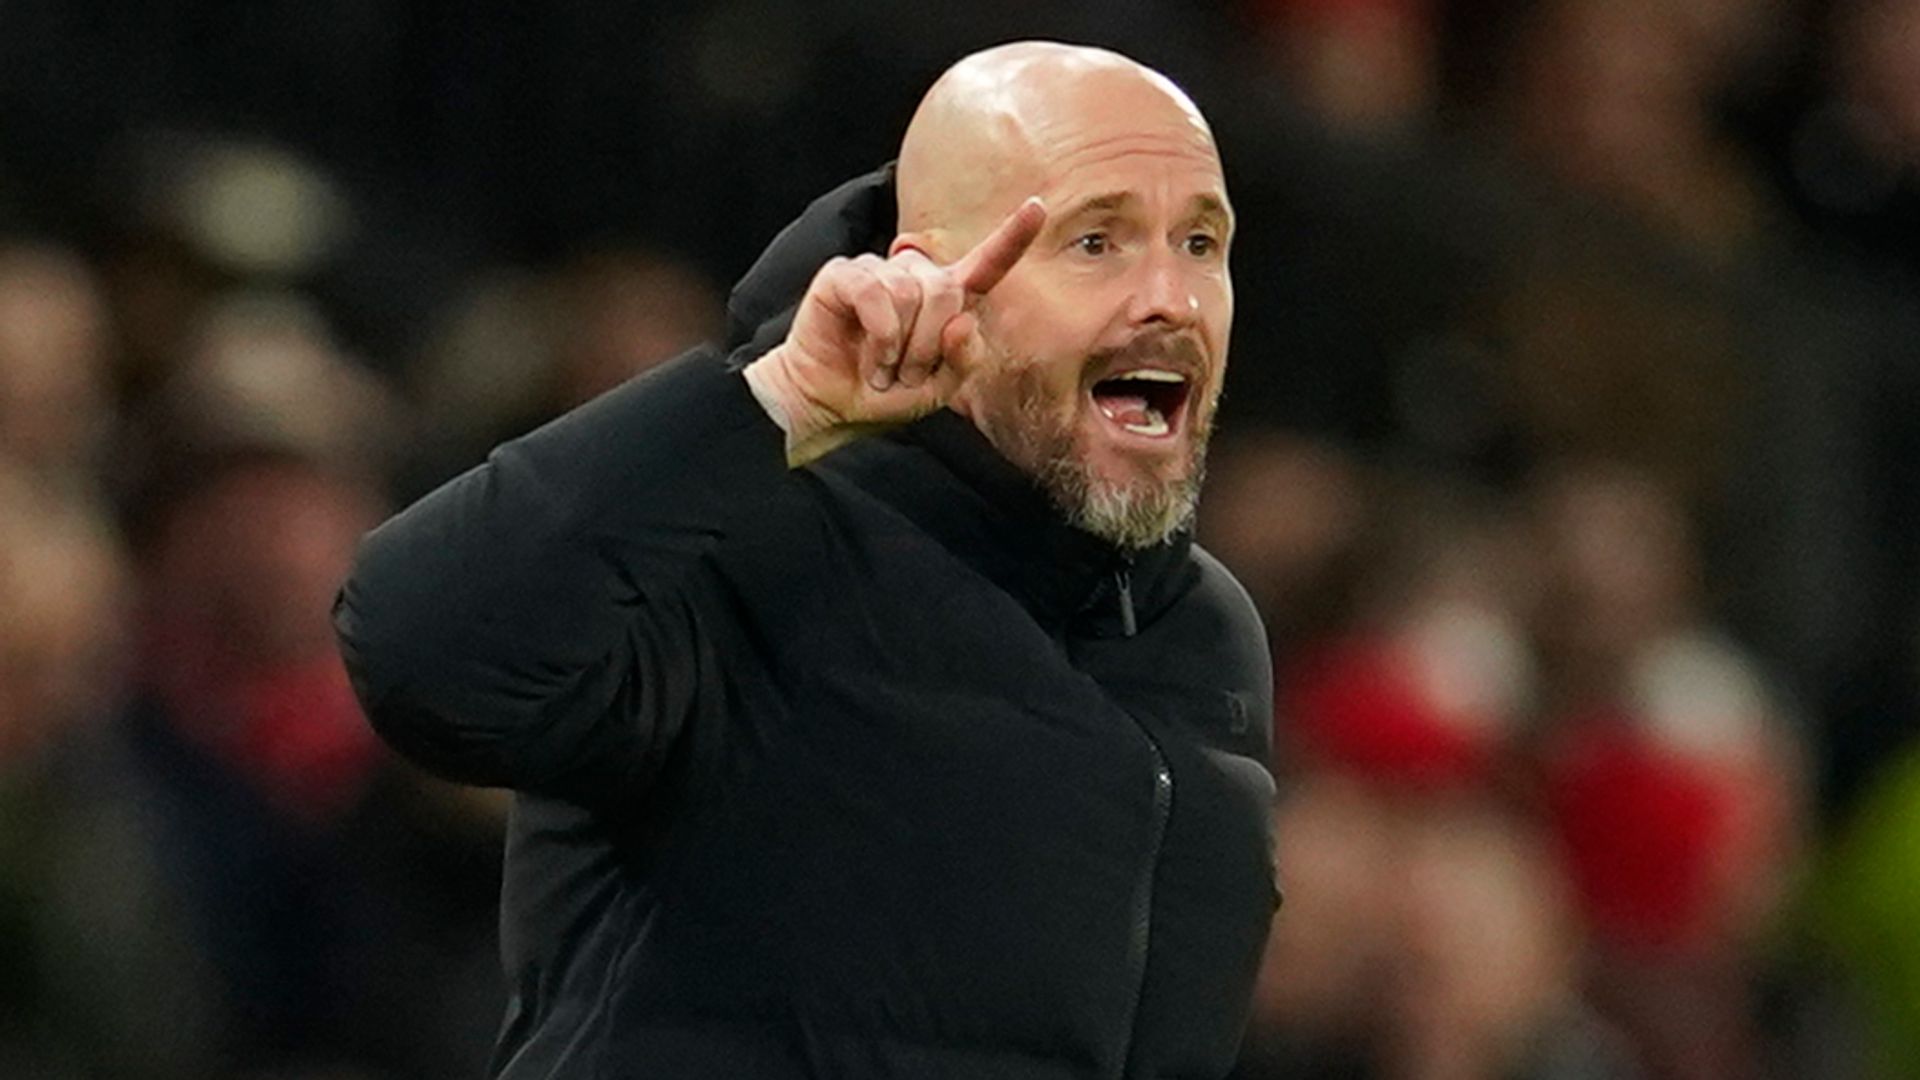 Ten Hag: I have the backing of Man Utd decision-makers